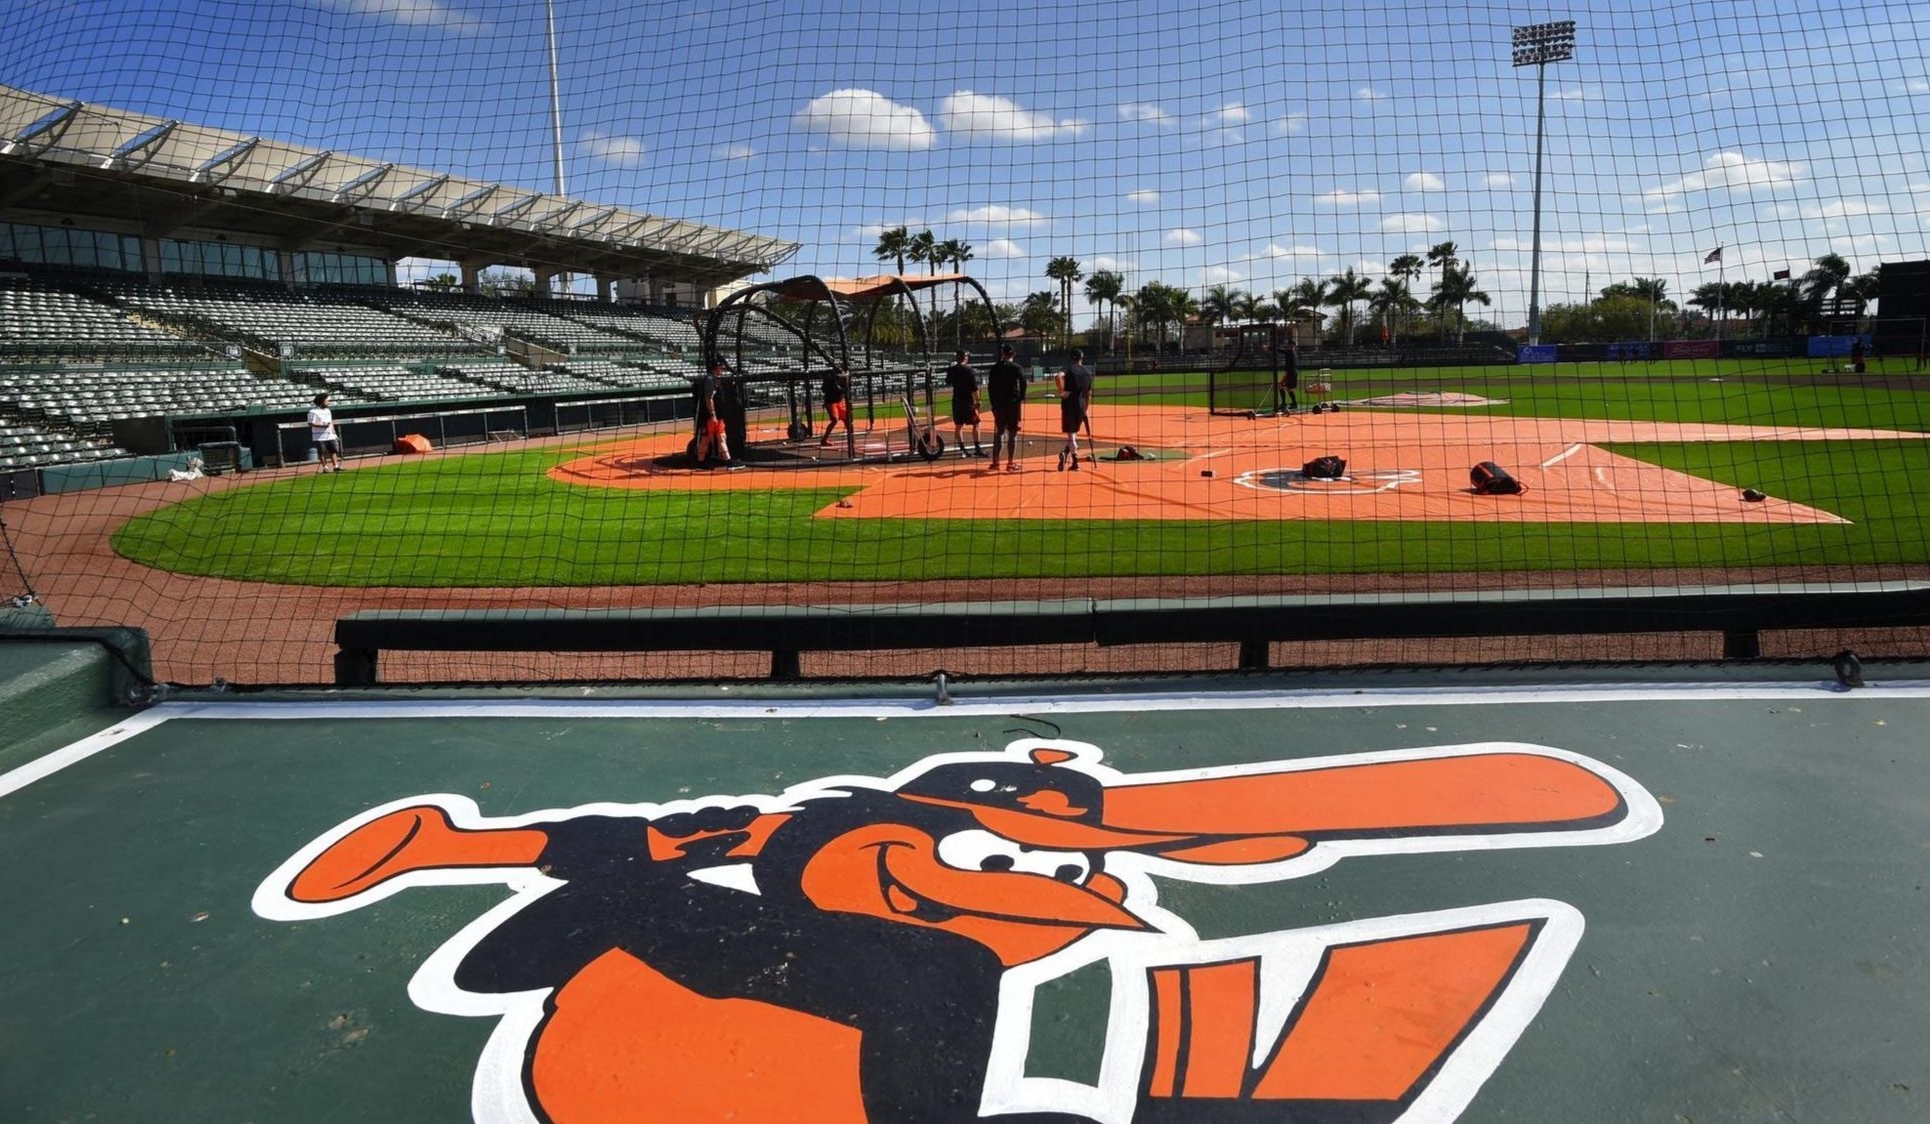 Orioles: Spring Training Questions To Ponder - Baltimore Sports and Life